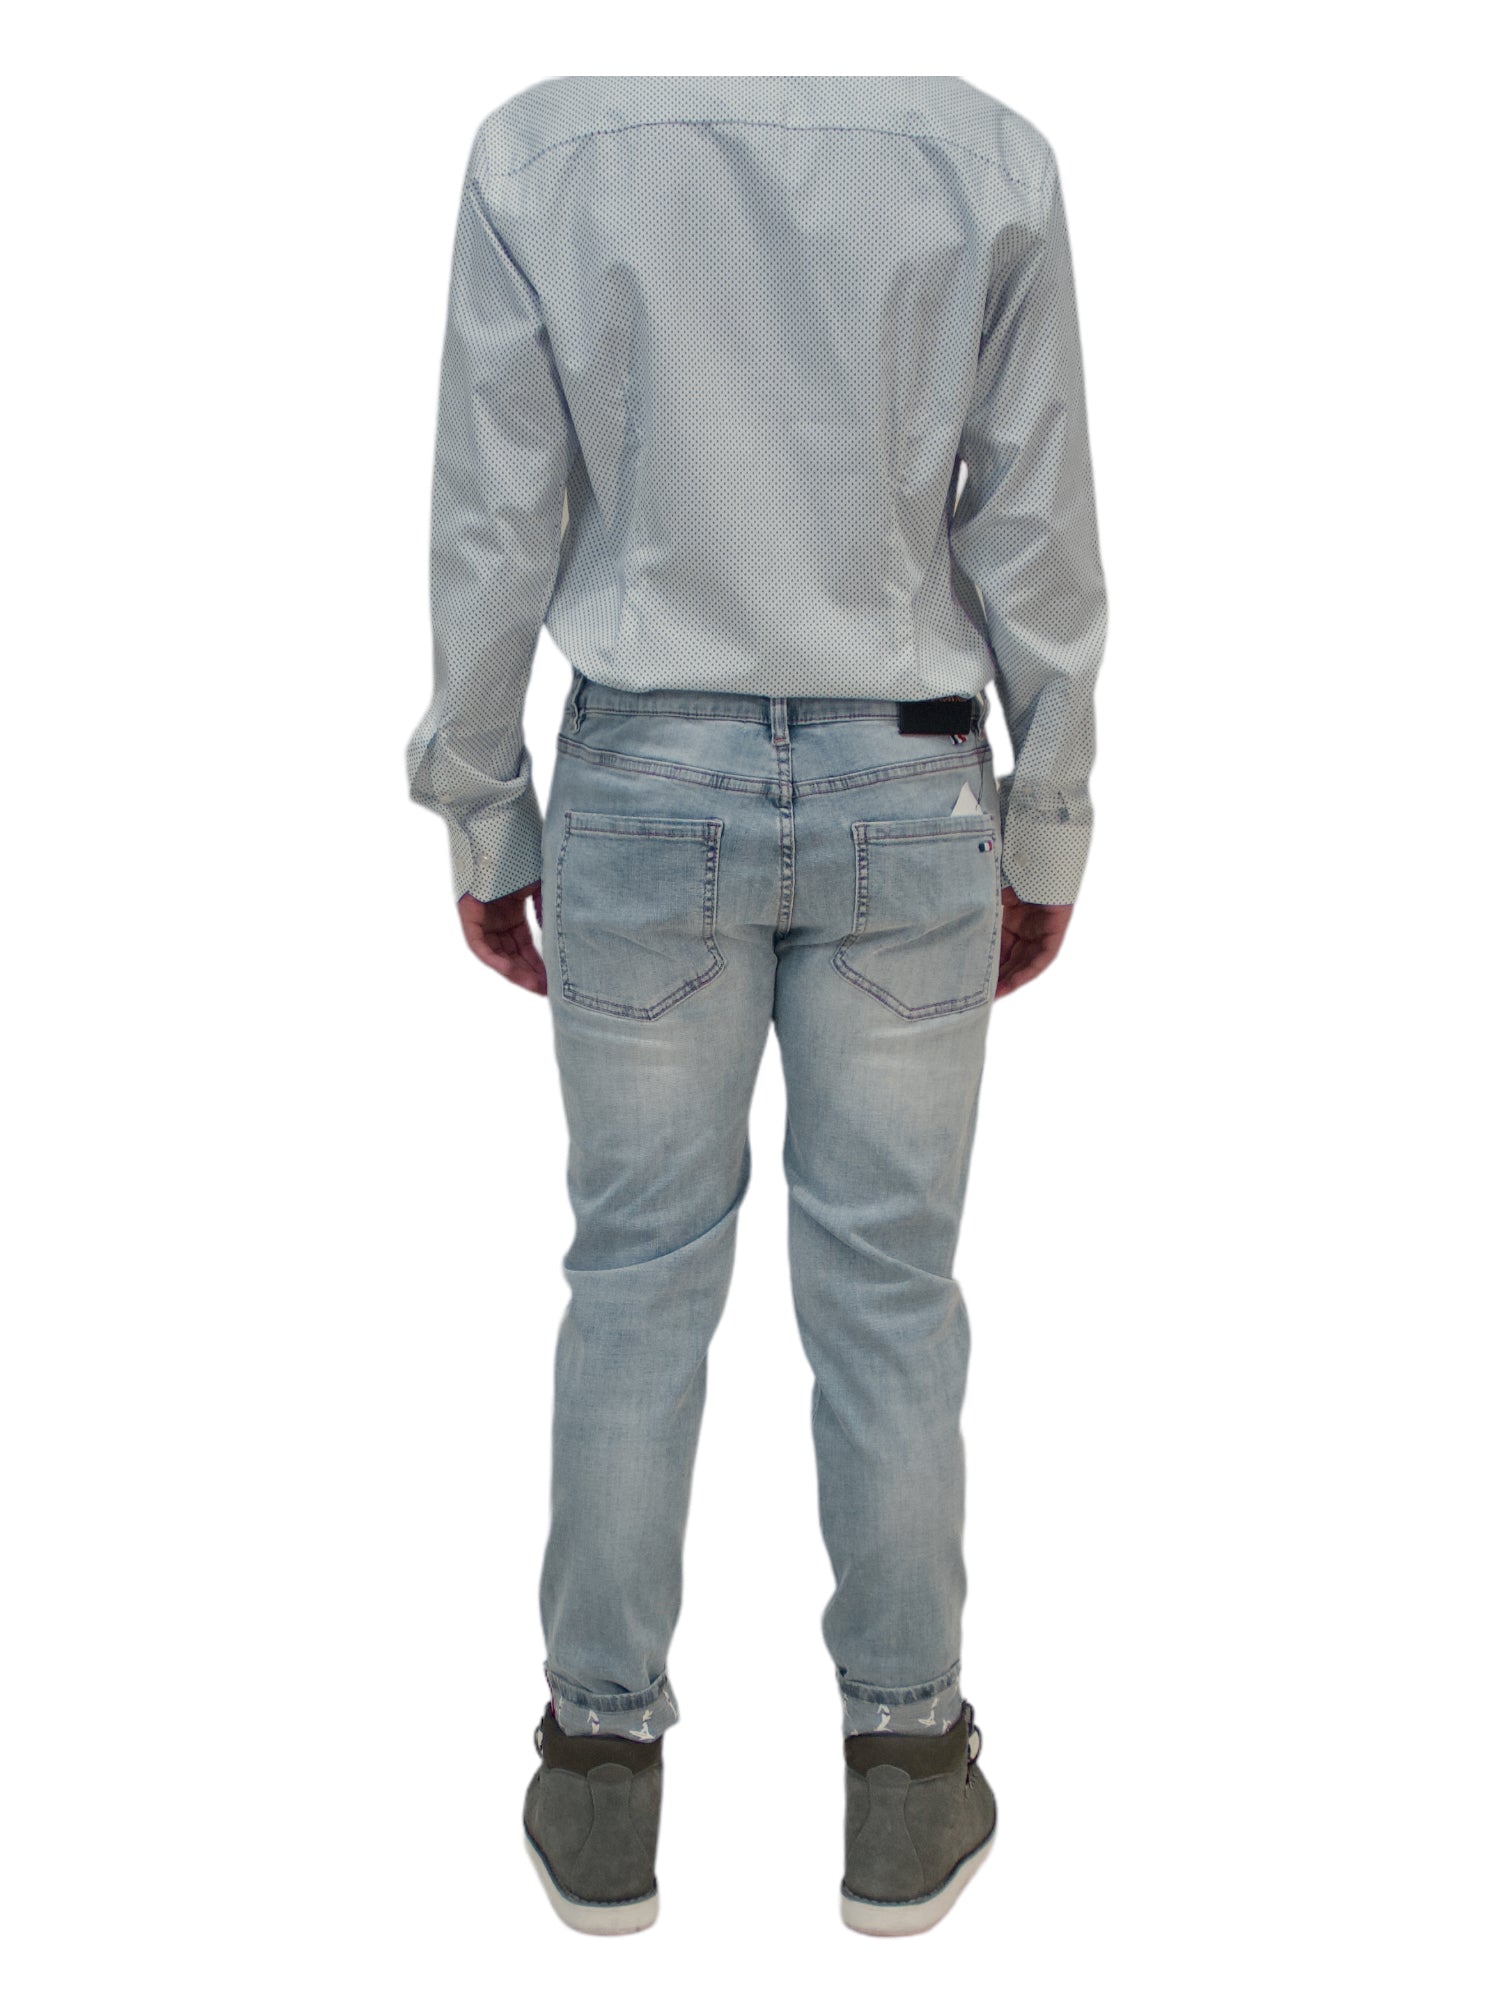 Thom Browne Blue Light Wash Distressed Jeans - Genuine Design luxury consignment Calgary, Alberta, Canada New and pre-owned clothing, shoes, accessories.